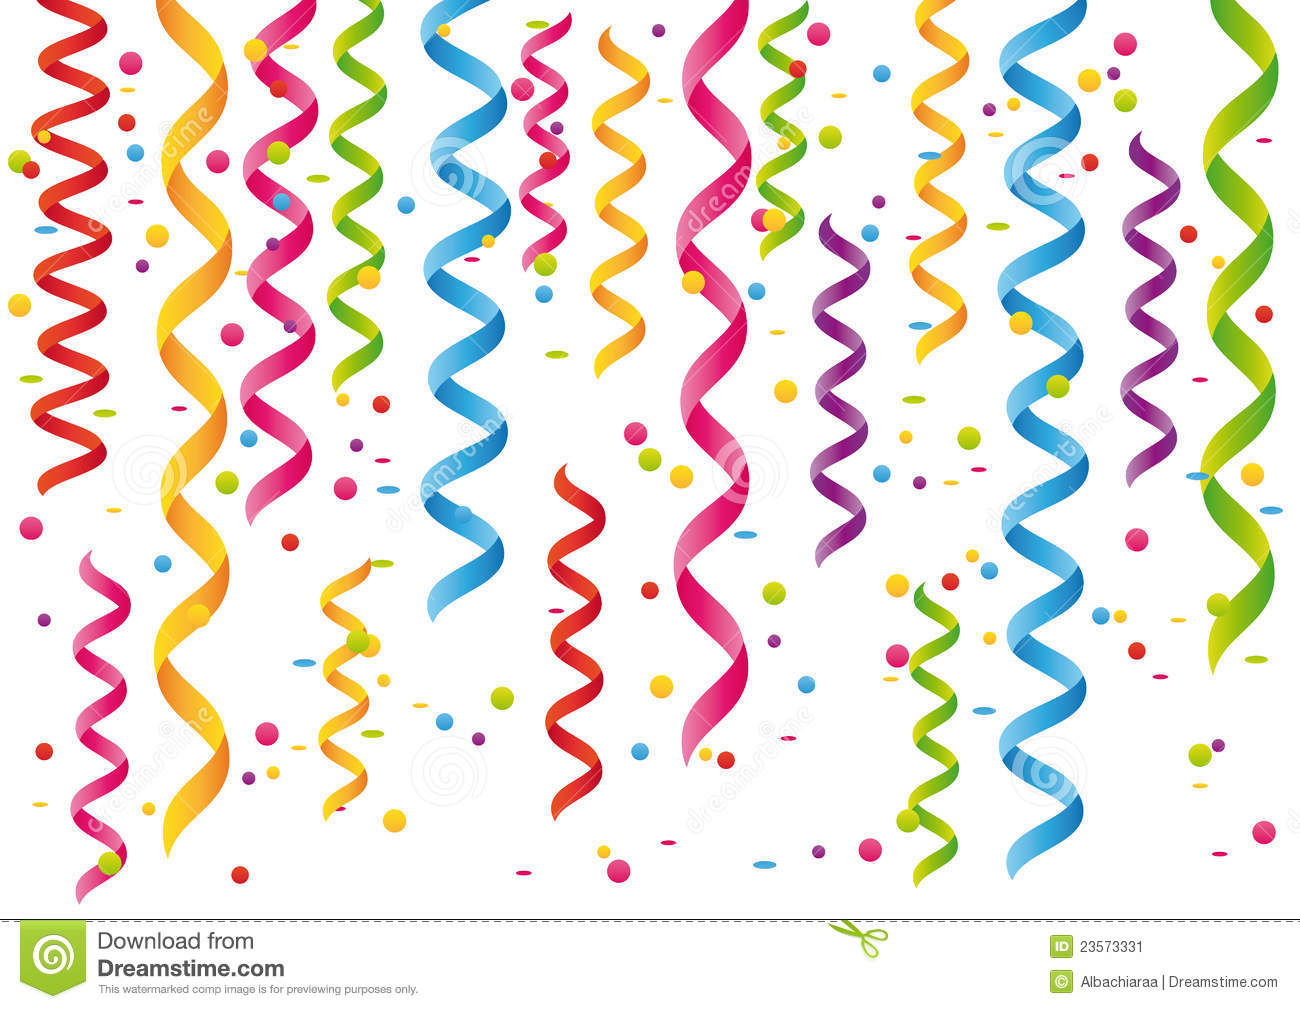 Streamers And Confetti  Stock Image   Image  23573331